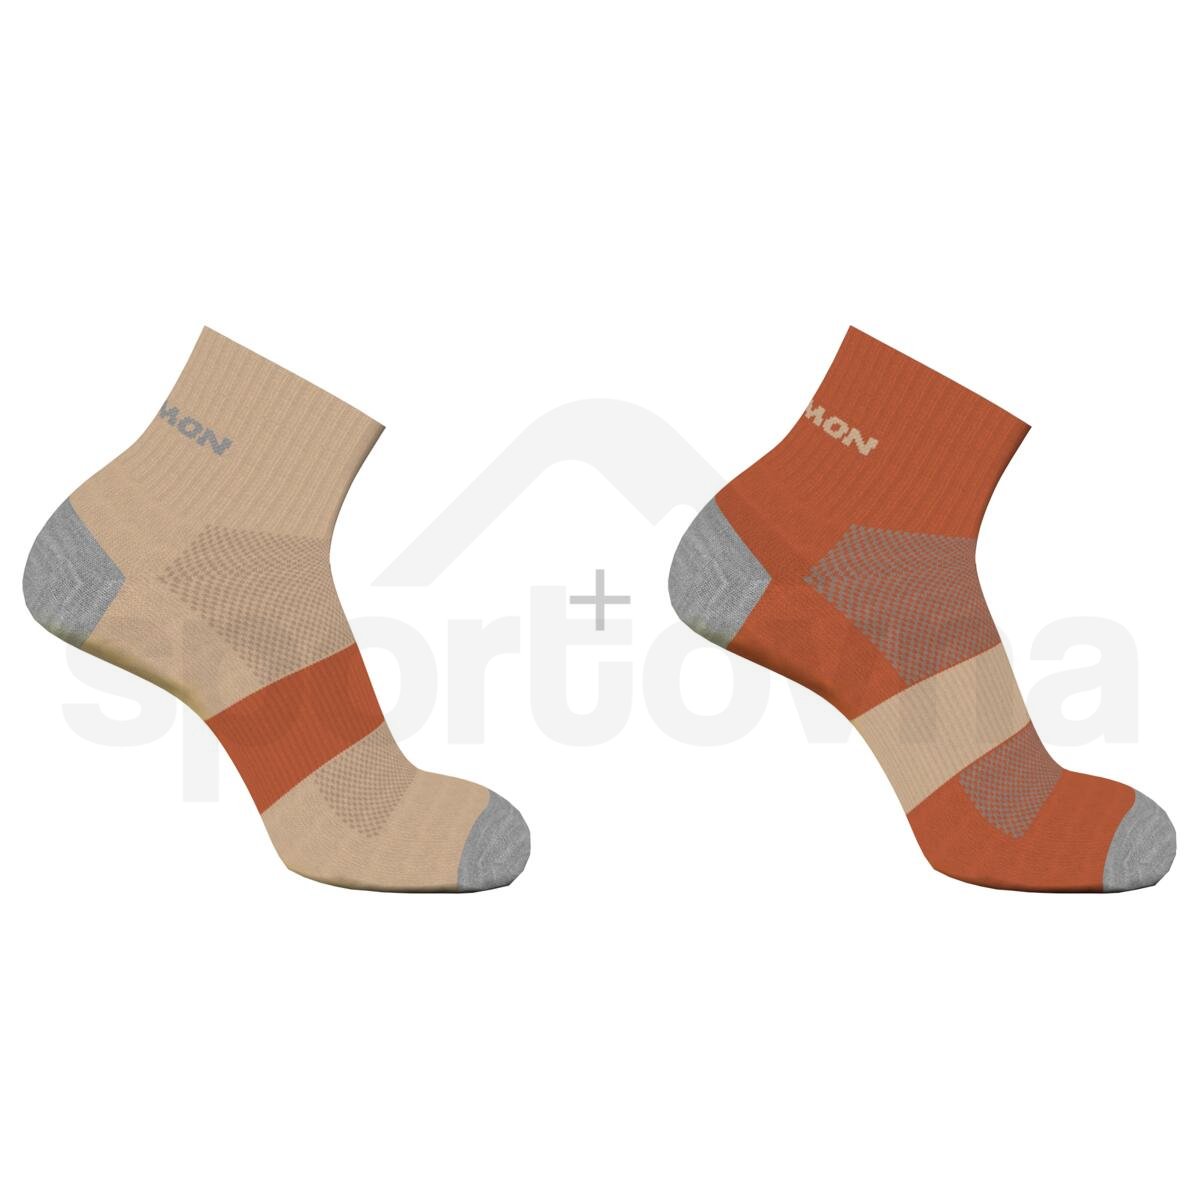 LC2257700_0_VIR_EVASION ANKLE 2PACK-Spice route-Doe.png.cq5dam.web.1200.1200